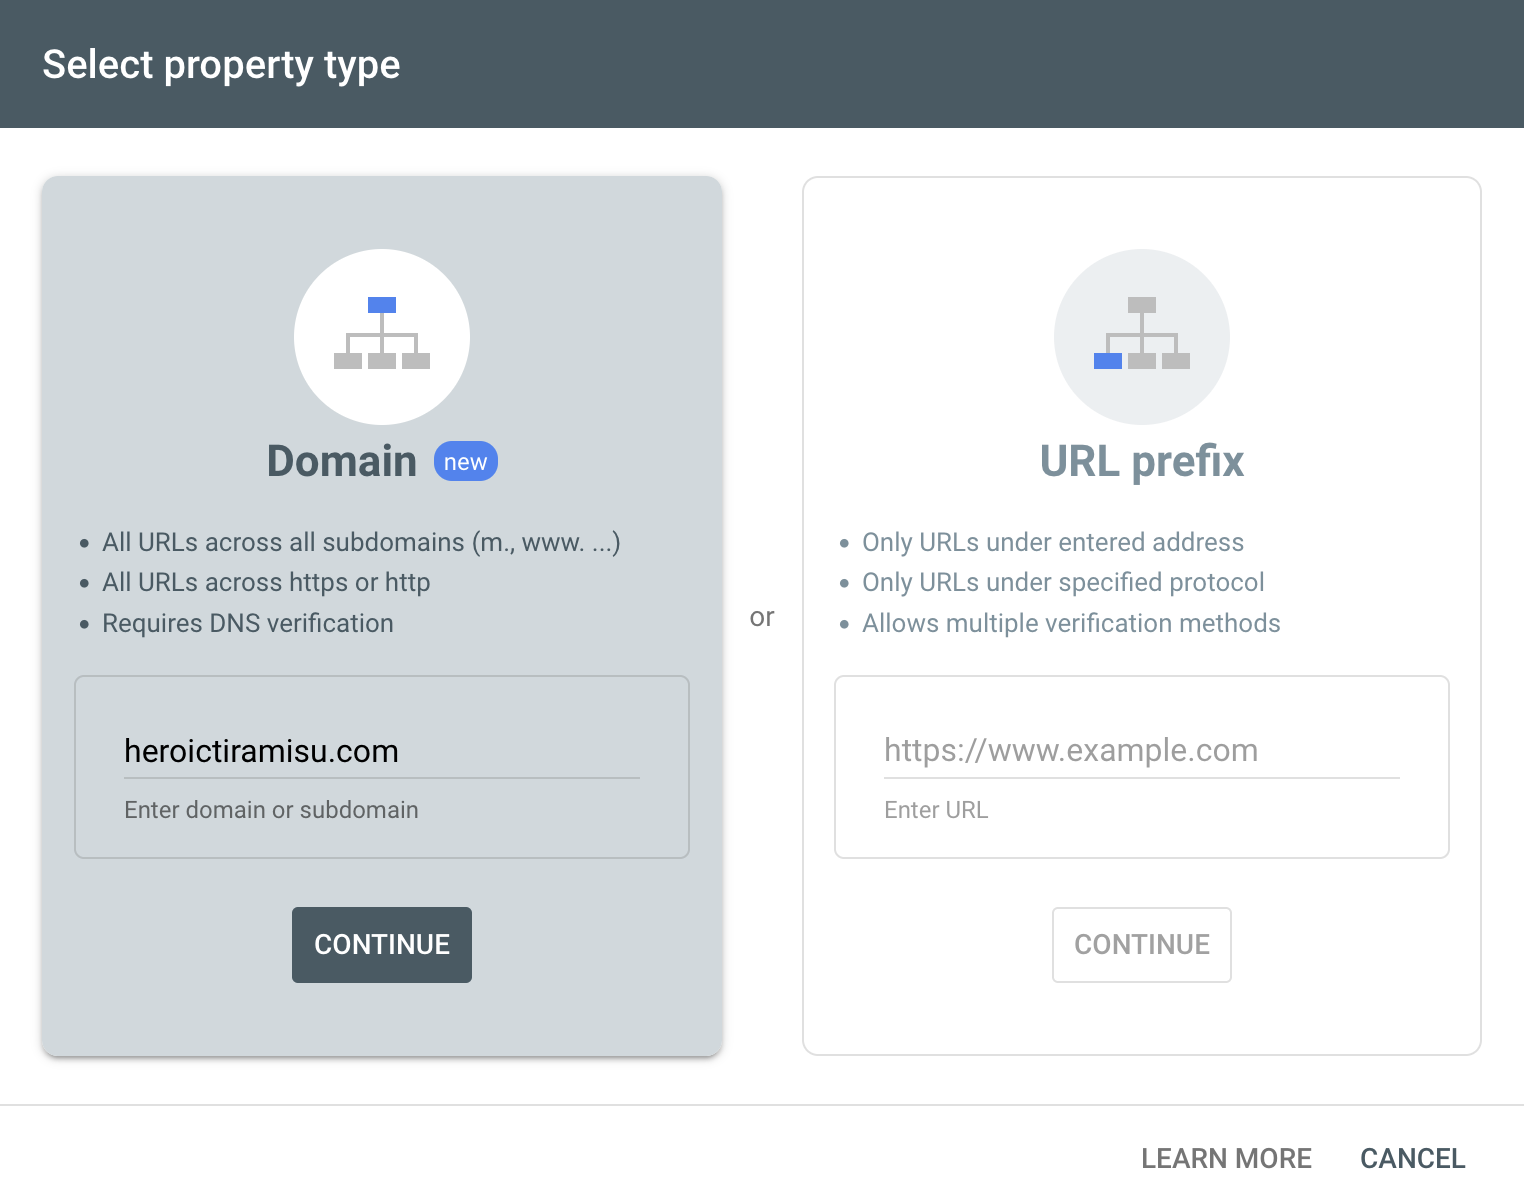 Adding a property in Google Search Console